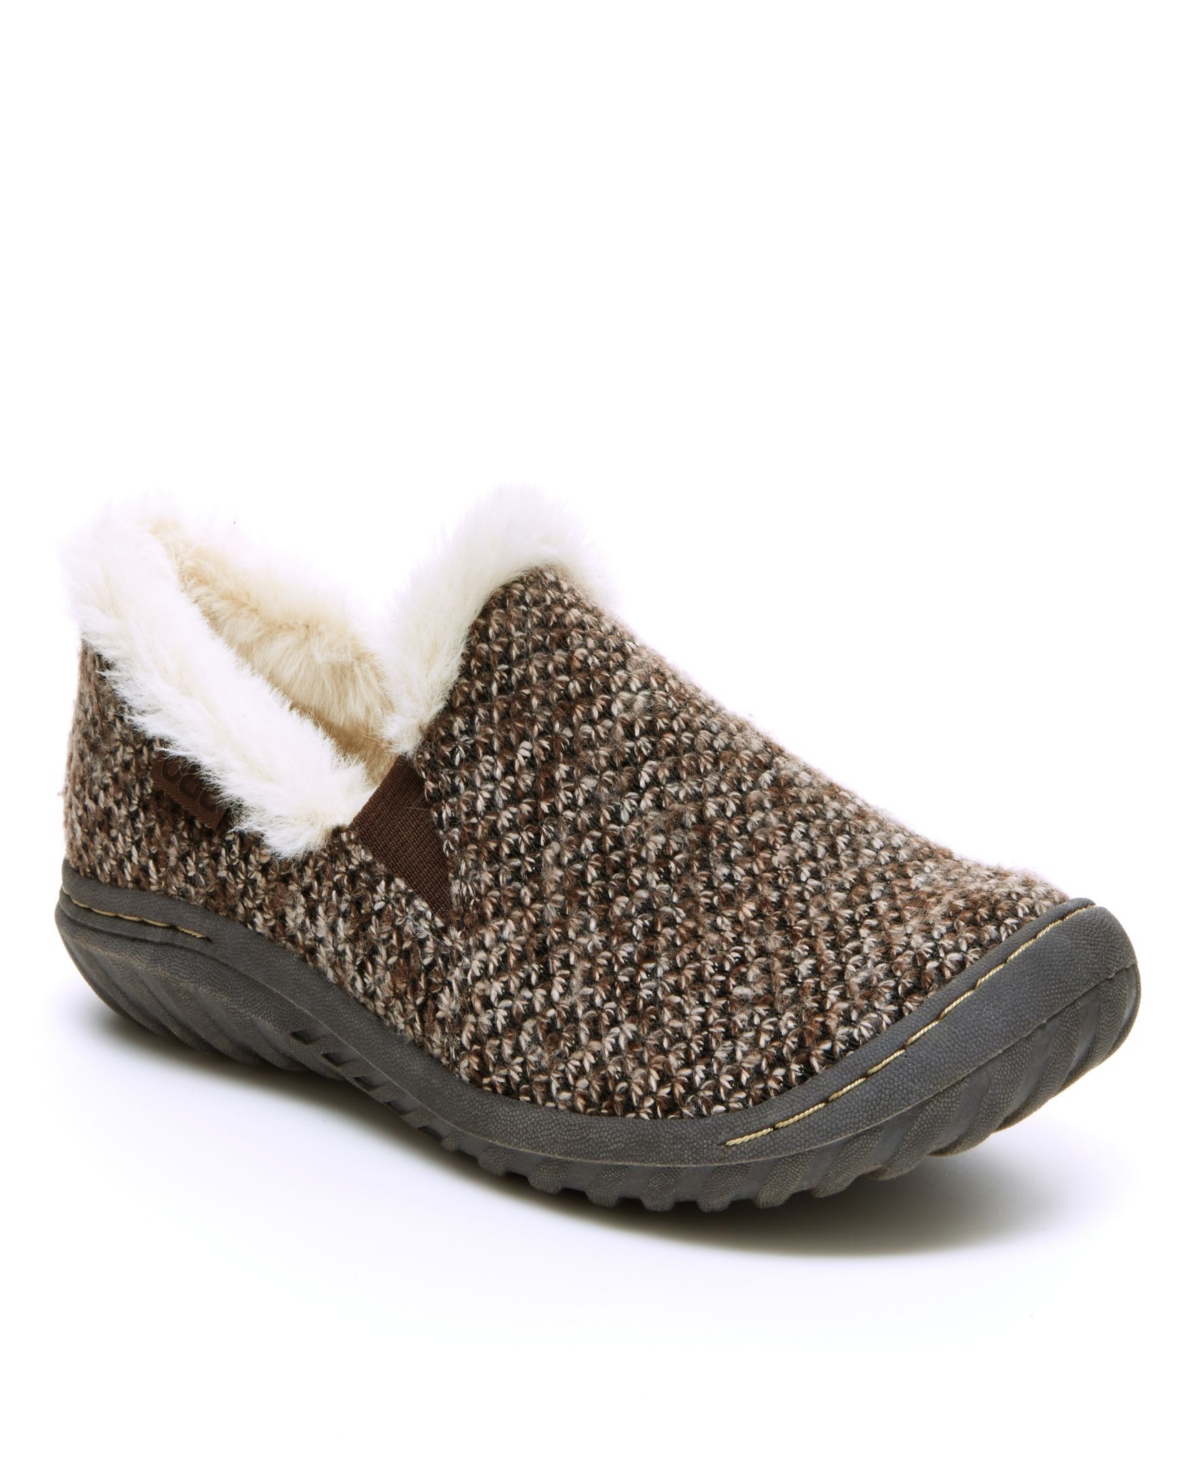 Willow Knit Casual Shoe - Brown